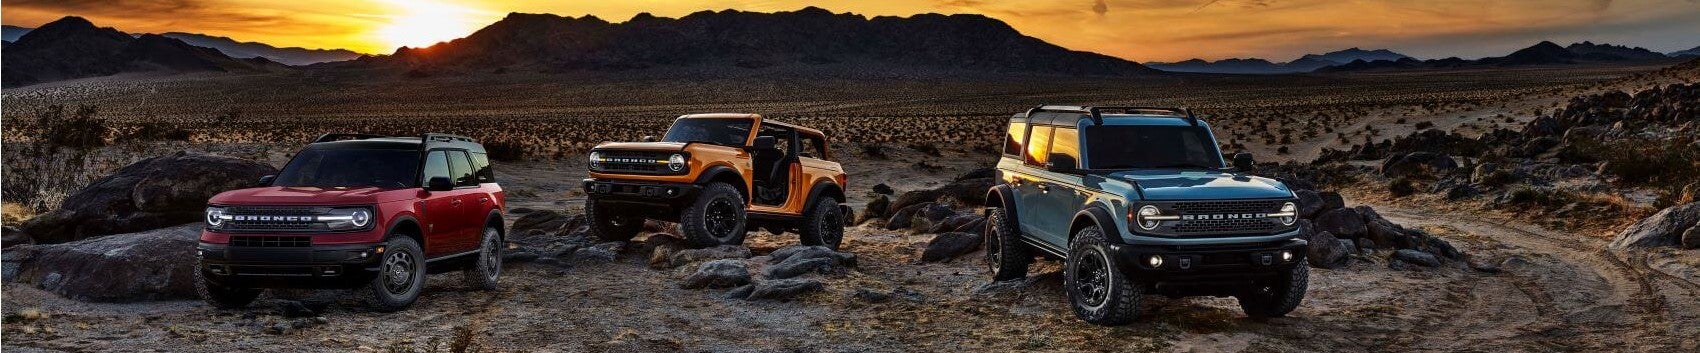 Ford Broncos in the Sunset